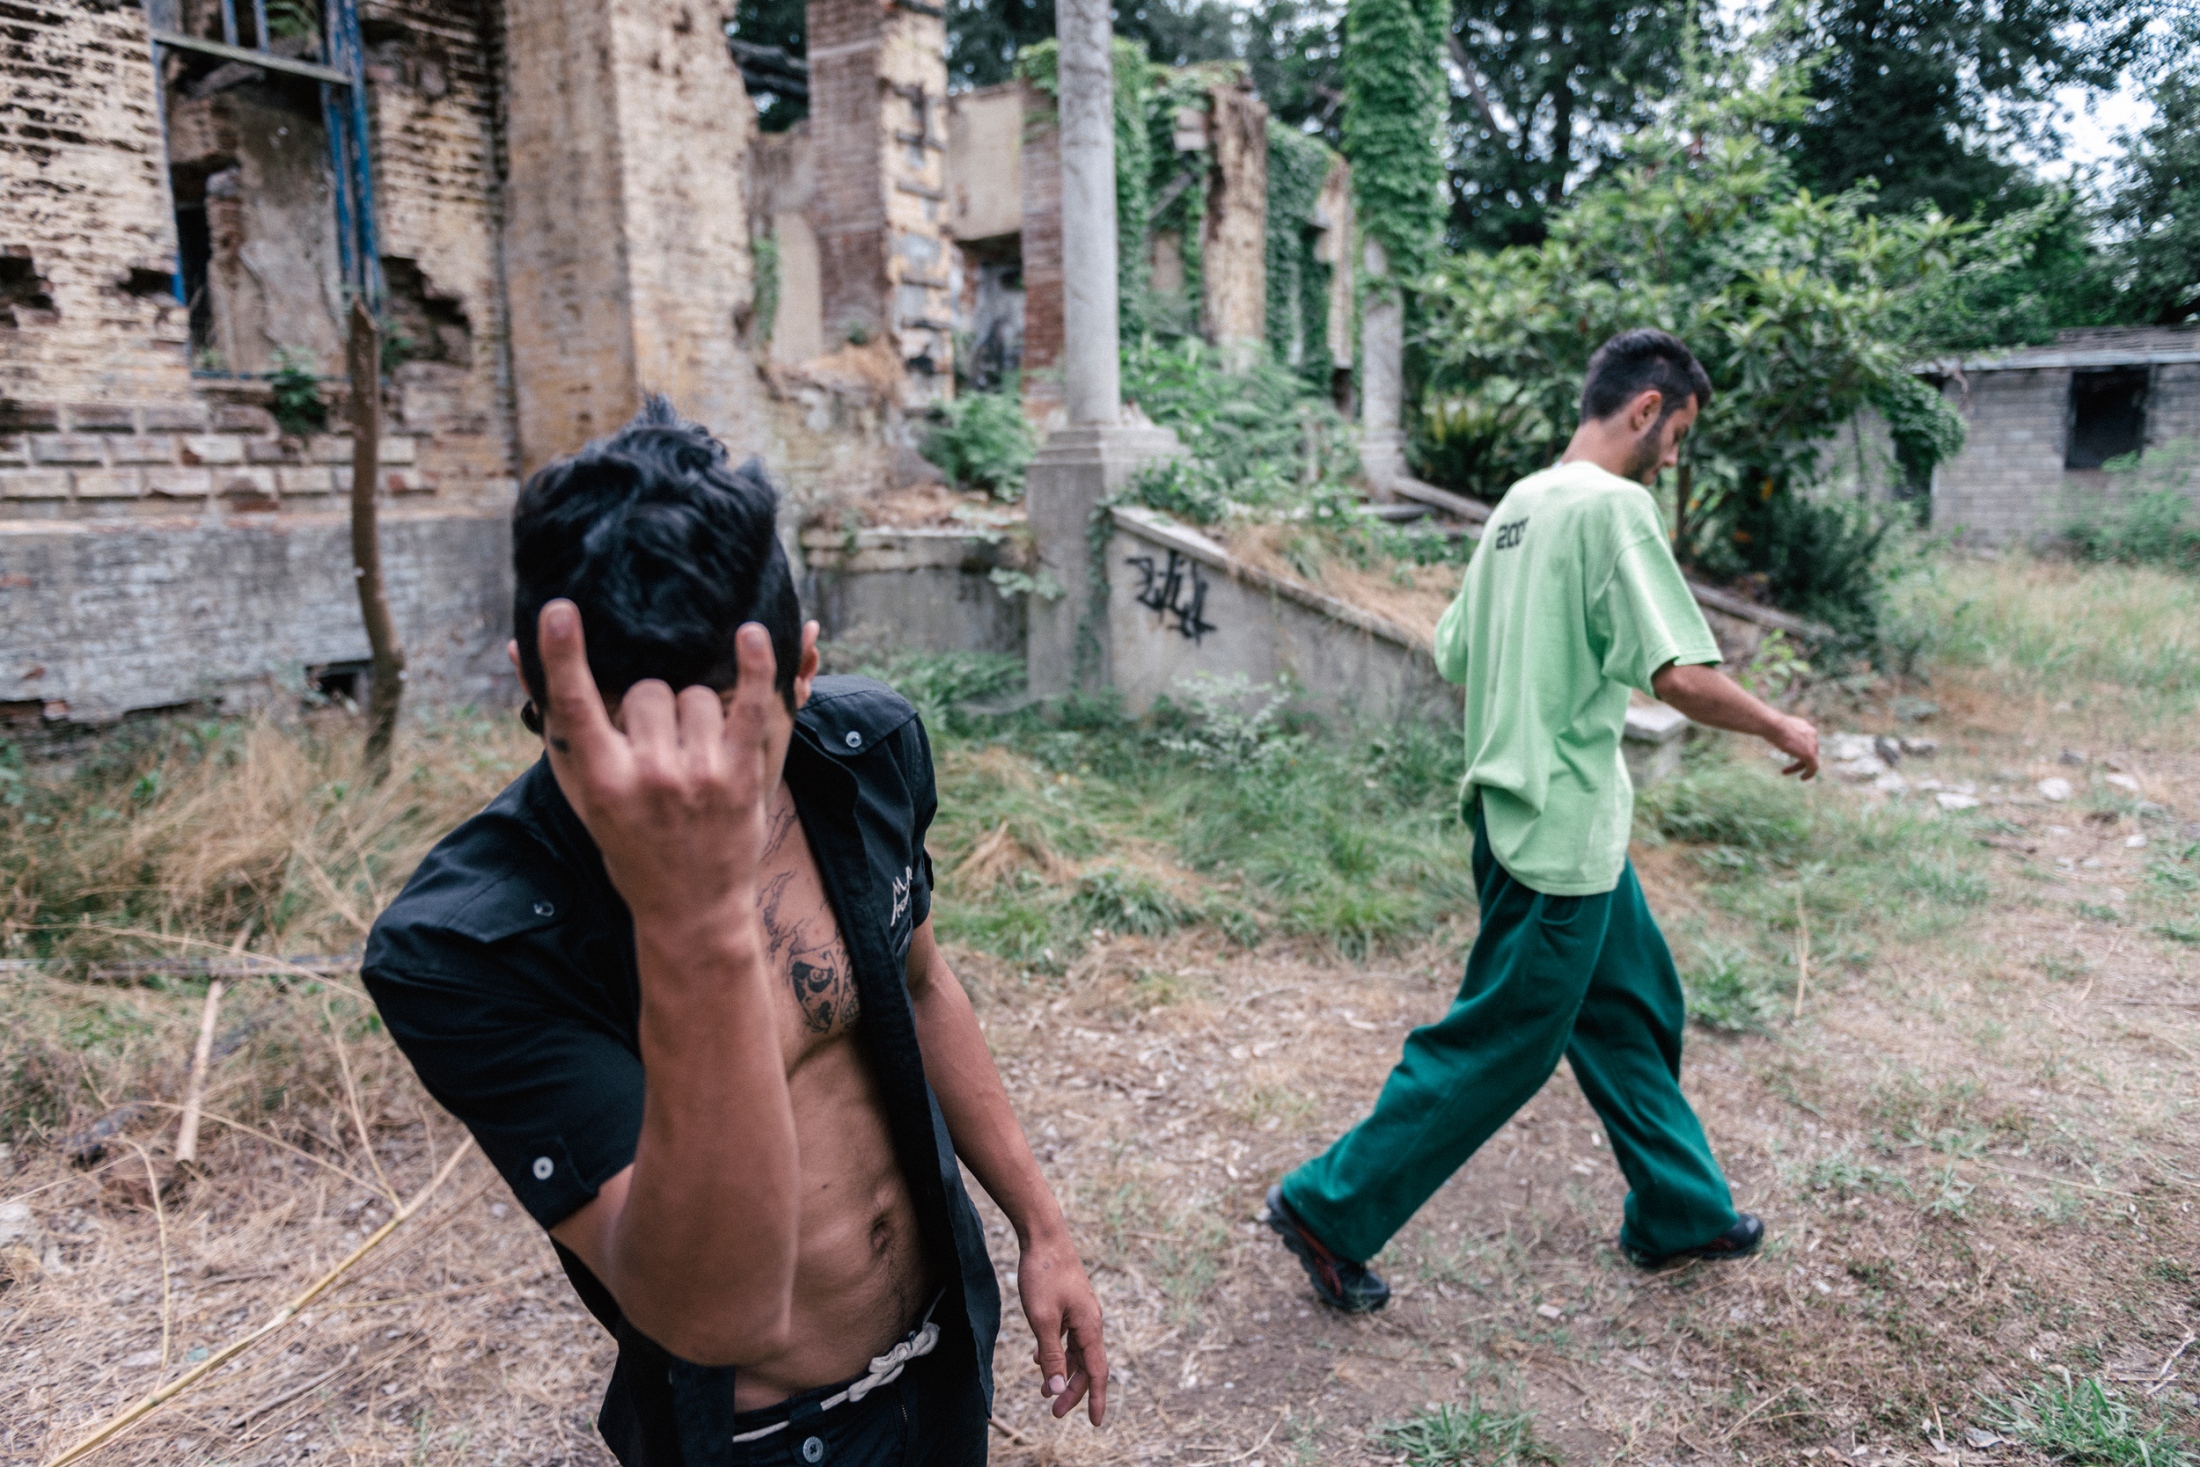  The signs and gestures they interest are totally involuntary. I asked about the meaning they refer to point; however, no one has a single approach, they just have some behaves which help them to be different from norms. Rasht, Iran, Jun 2014. 